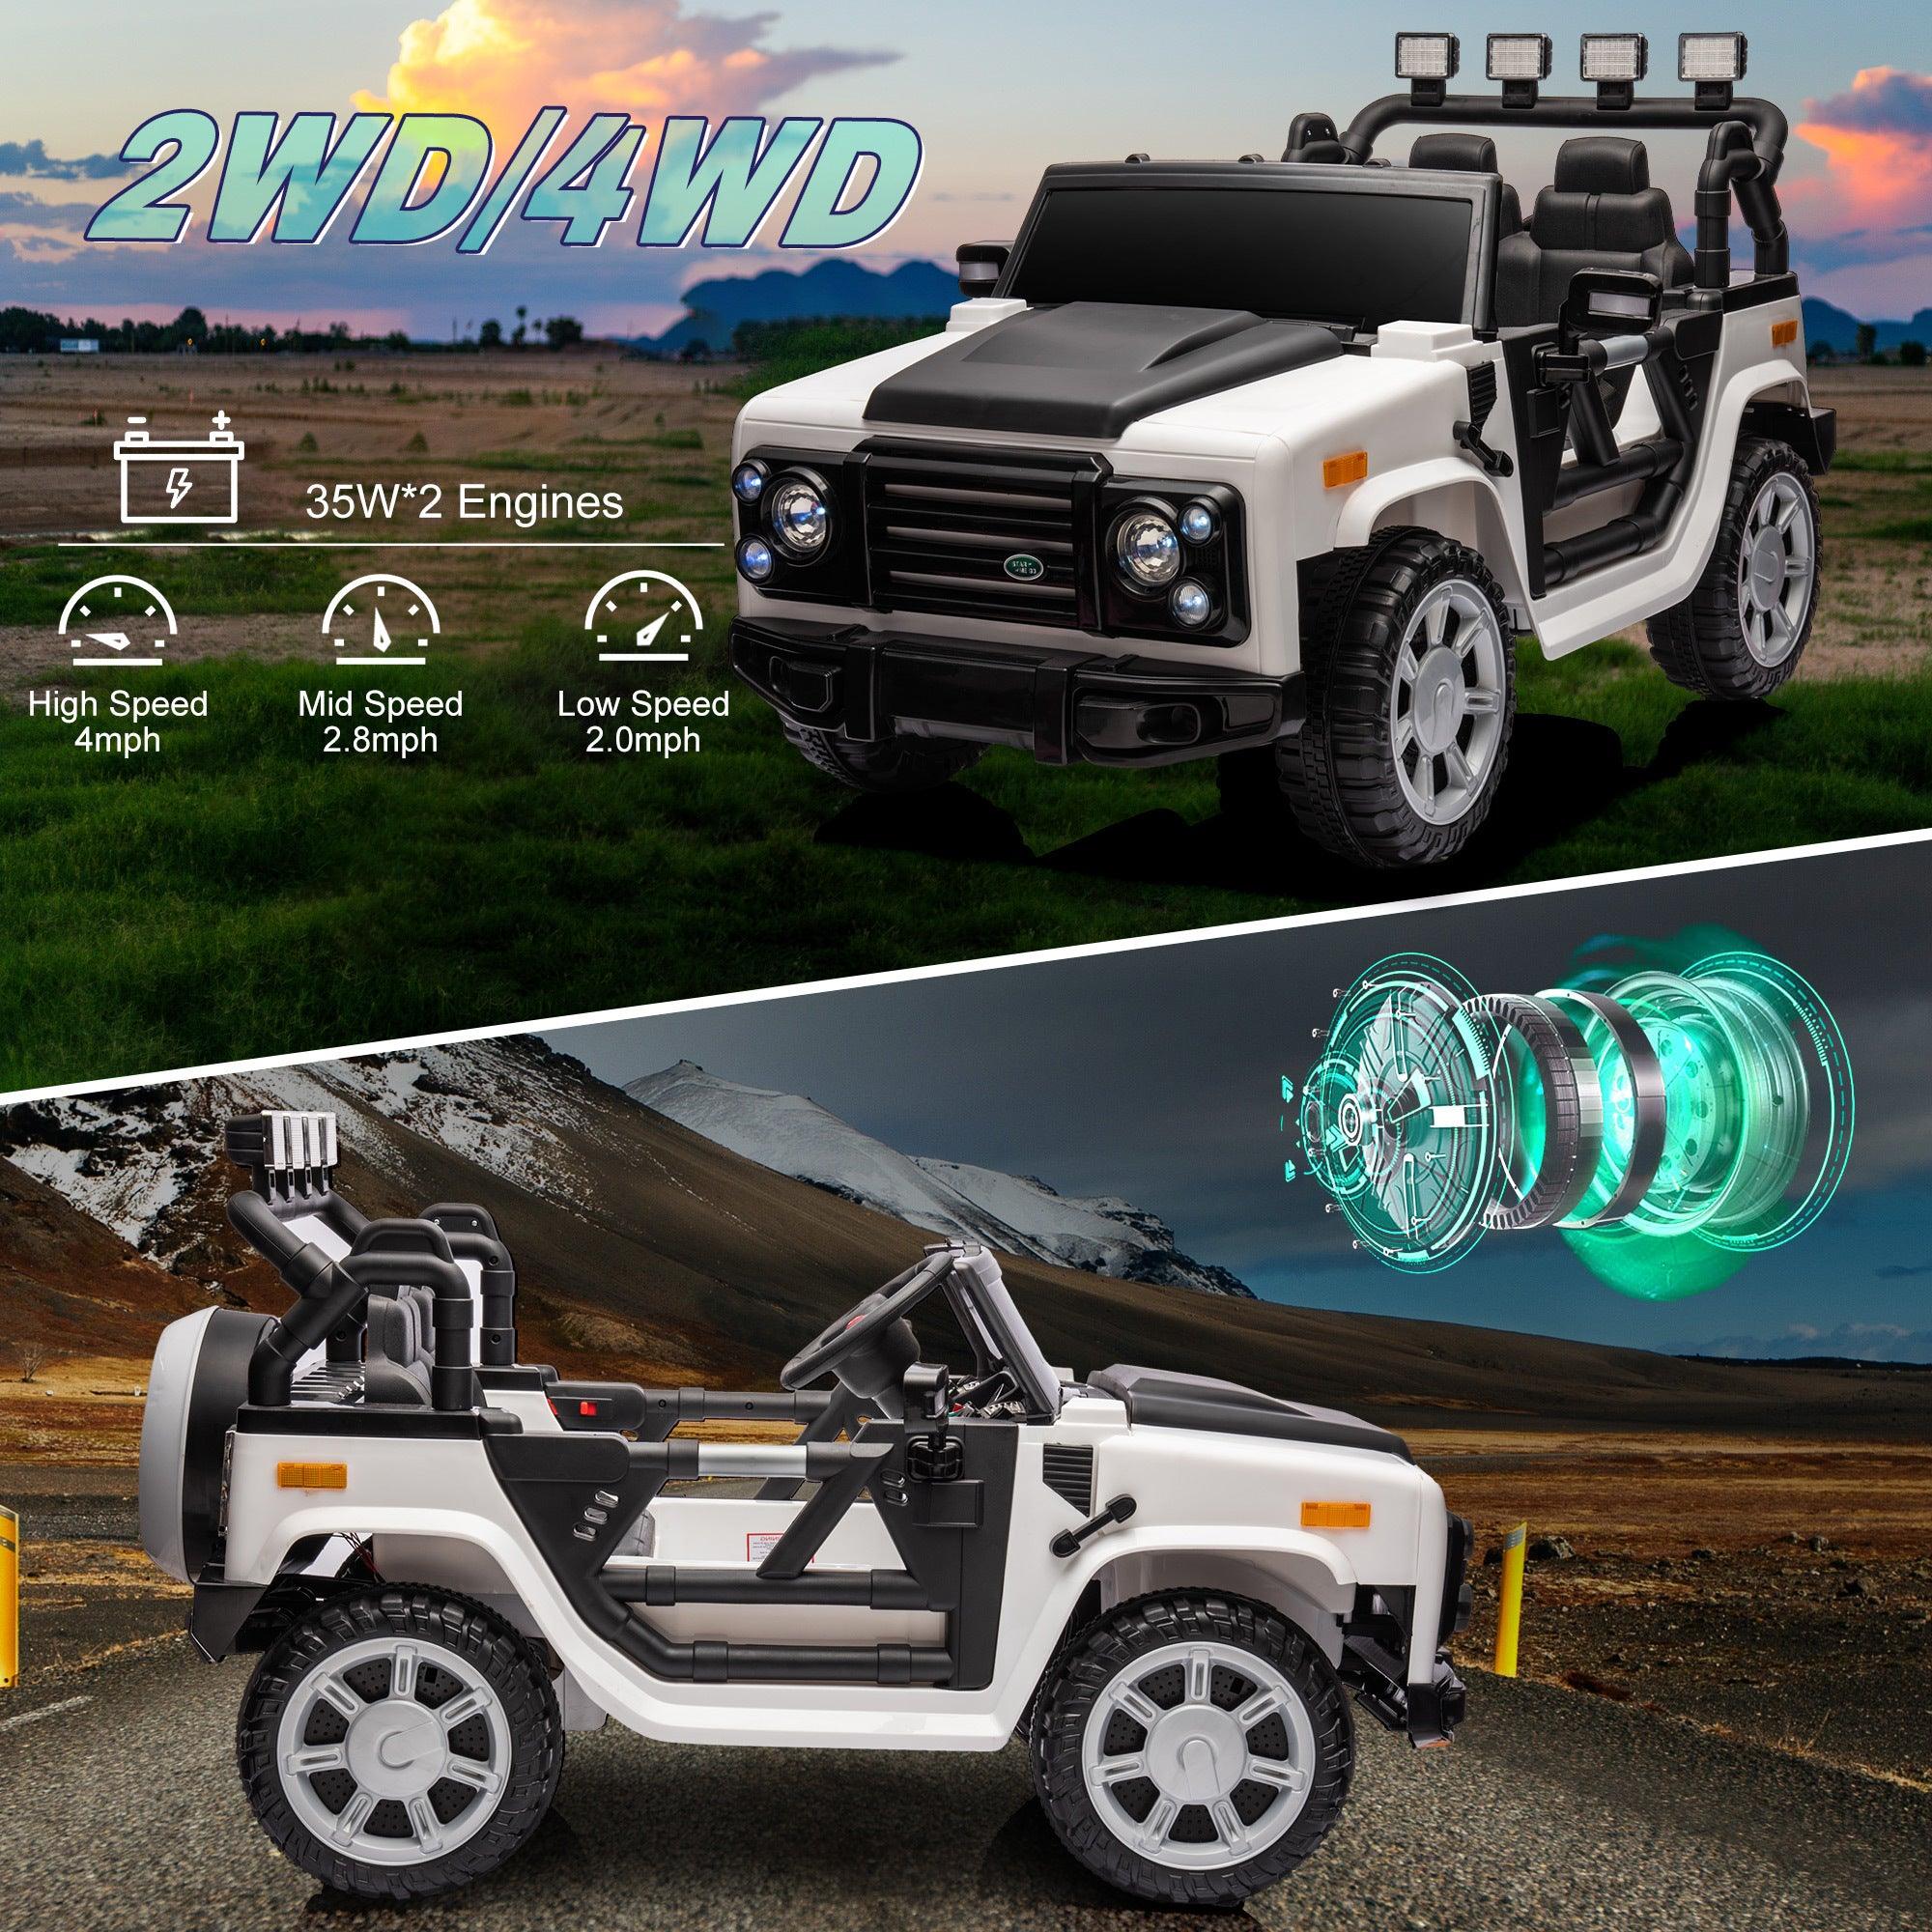 🆓🚛 12V7A 30W*2 Four-Wheel Drive Electric Ride On Open Car, 1 Button Start, Forward & Backward, High & Low Speed, Music, Front Light, Power Display, 2.4G R/C, Seat Belt 4 Wheel Absorber, Black & White